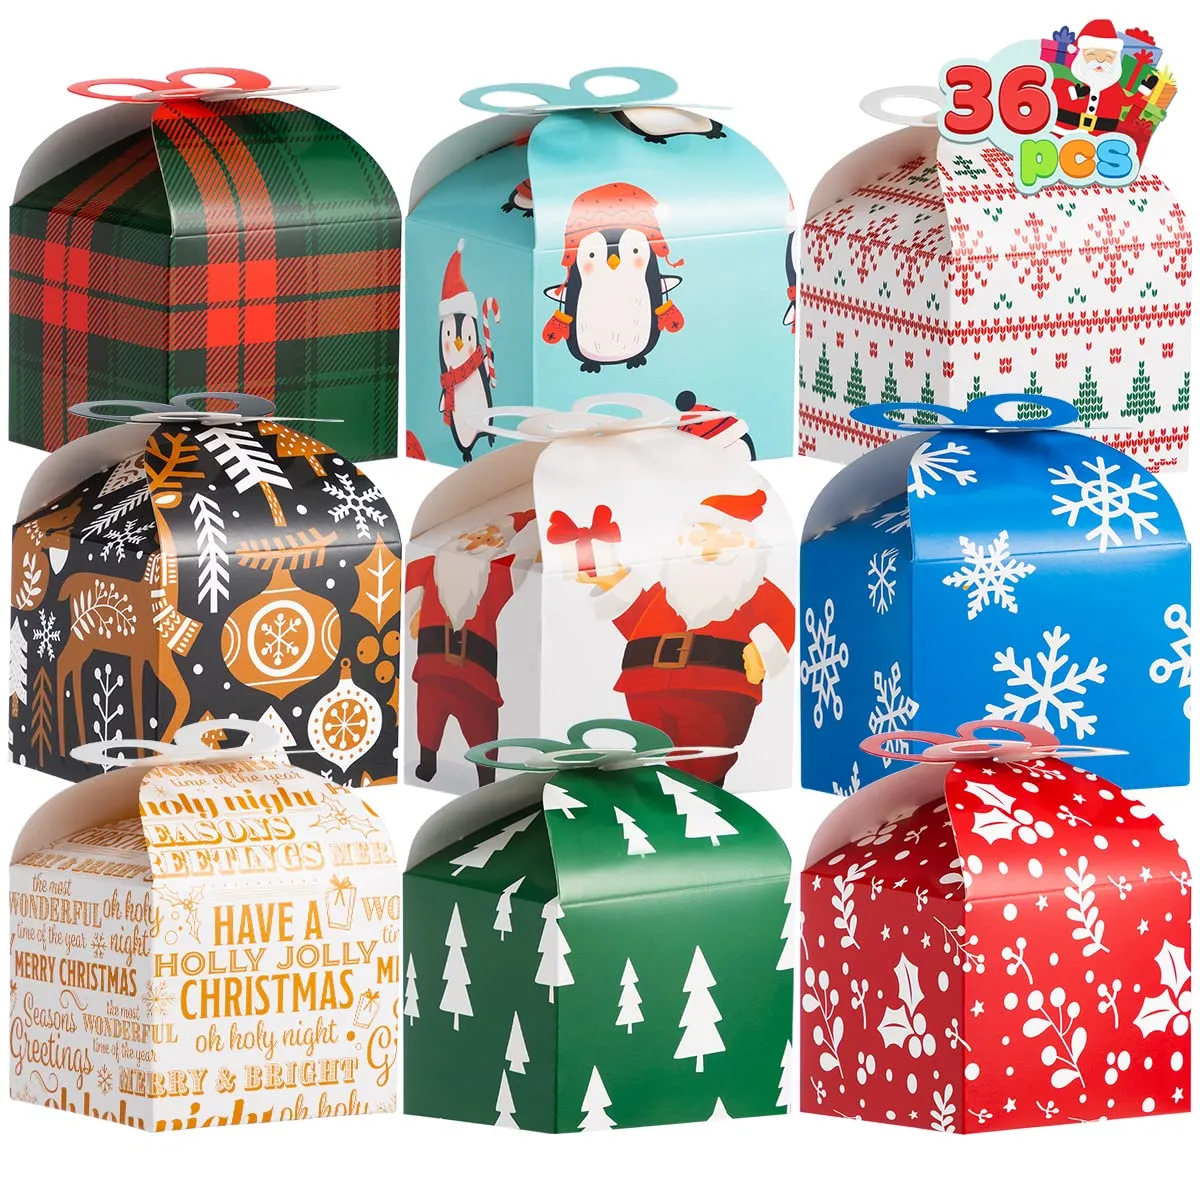 christmas treat boxes candy boxes party favor christmas cookie dessert goody boxes with handle for christmas gift giving 6 patterns